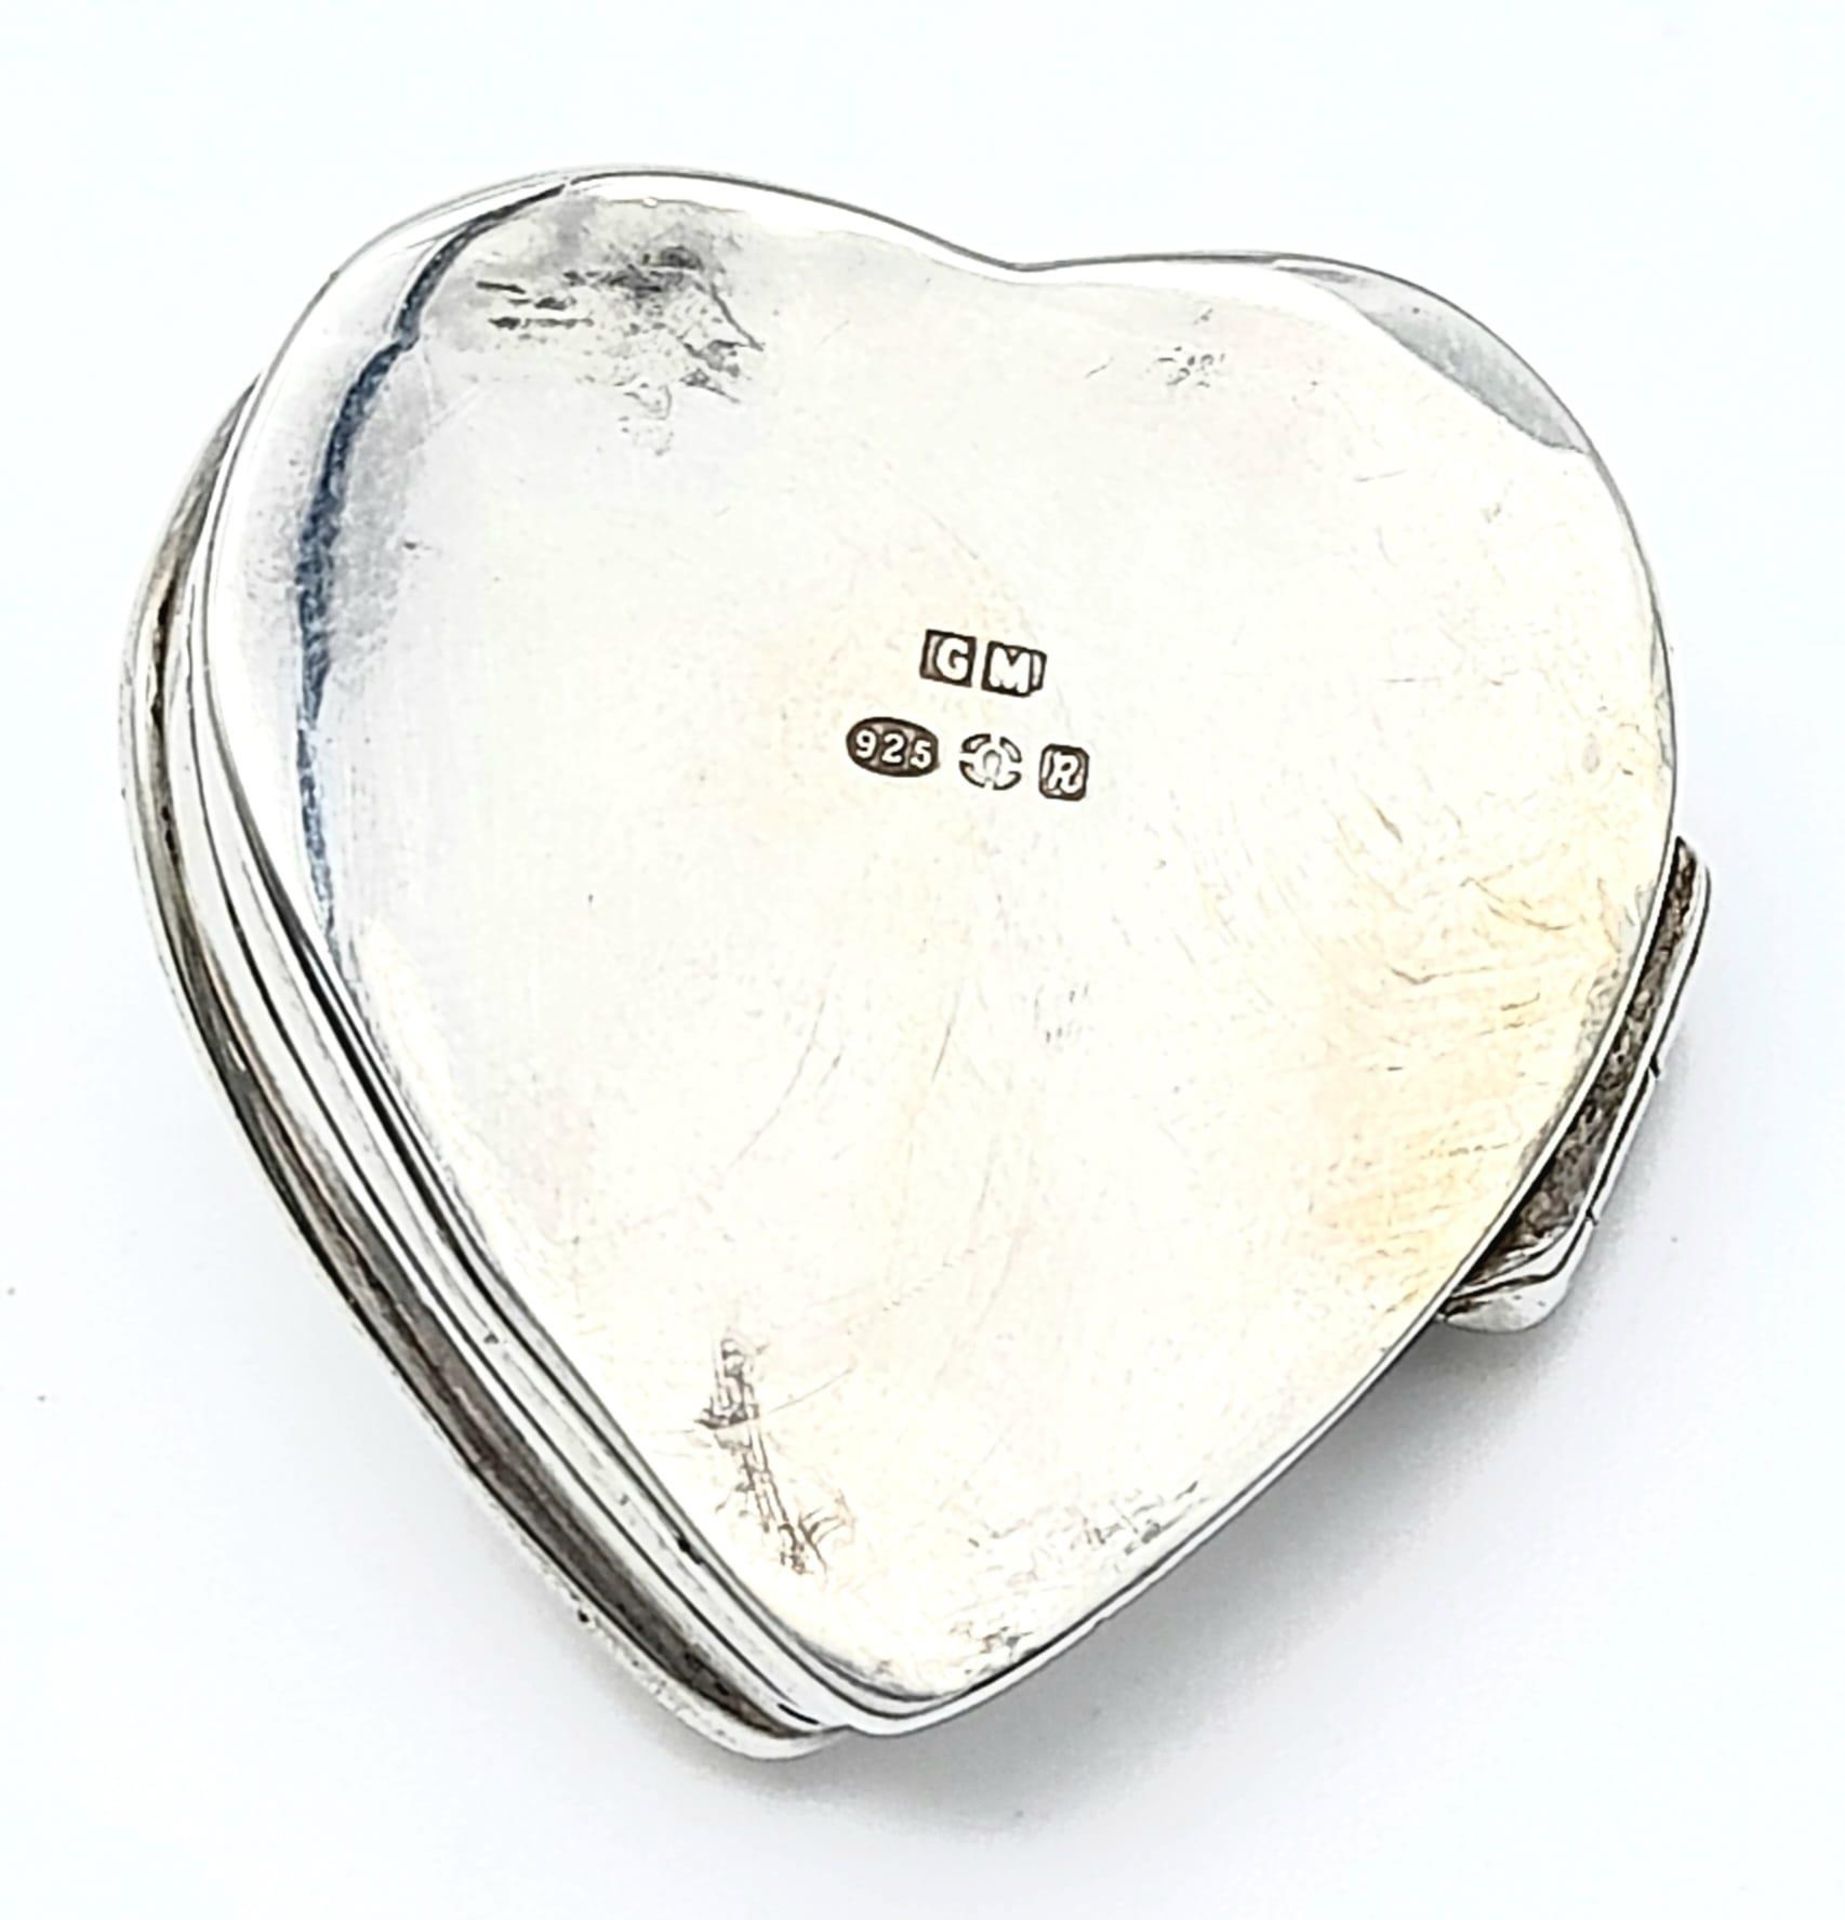 A Vintage Sterling Silver Heart Shaped Pill Box with Amethyst Decoration. Hallmarks at rear. 3.5 x - Image 2 of 5